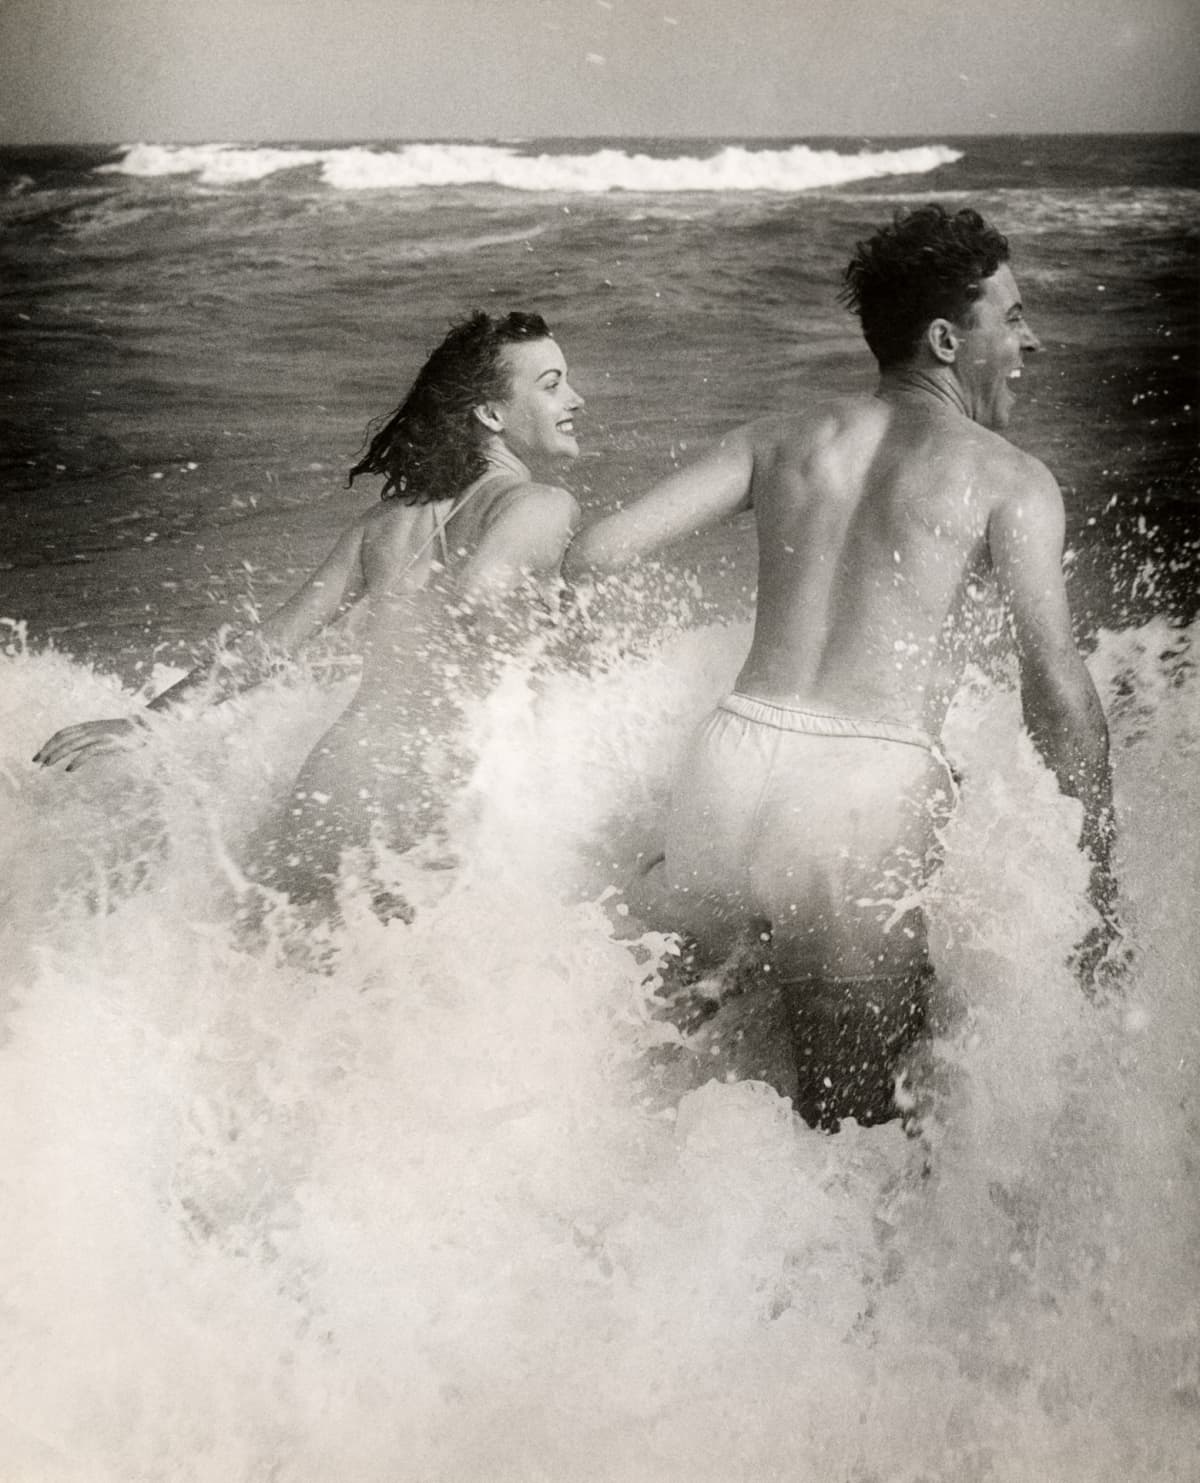 Couple playing in the ocean